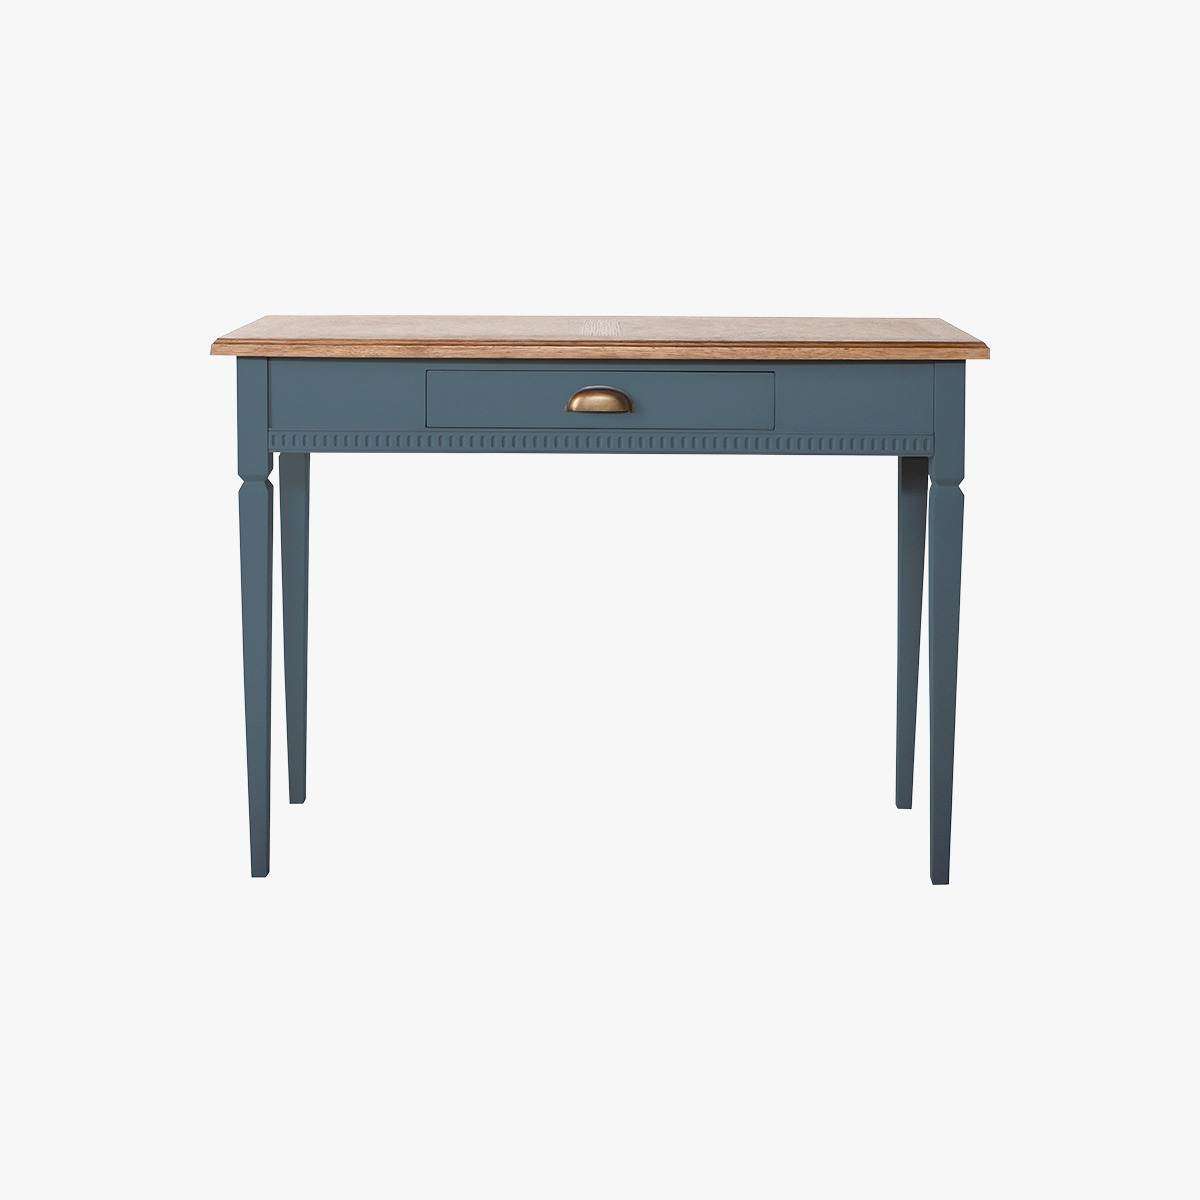 Sienna Console Table in Teal